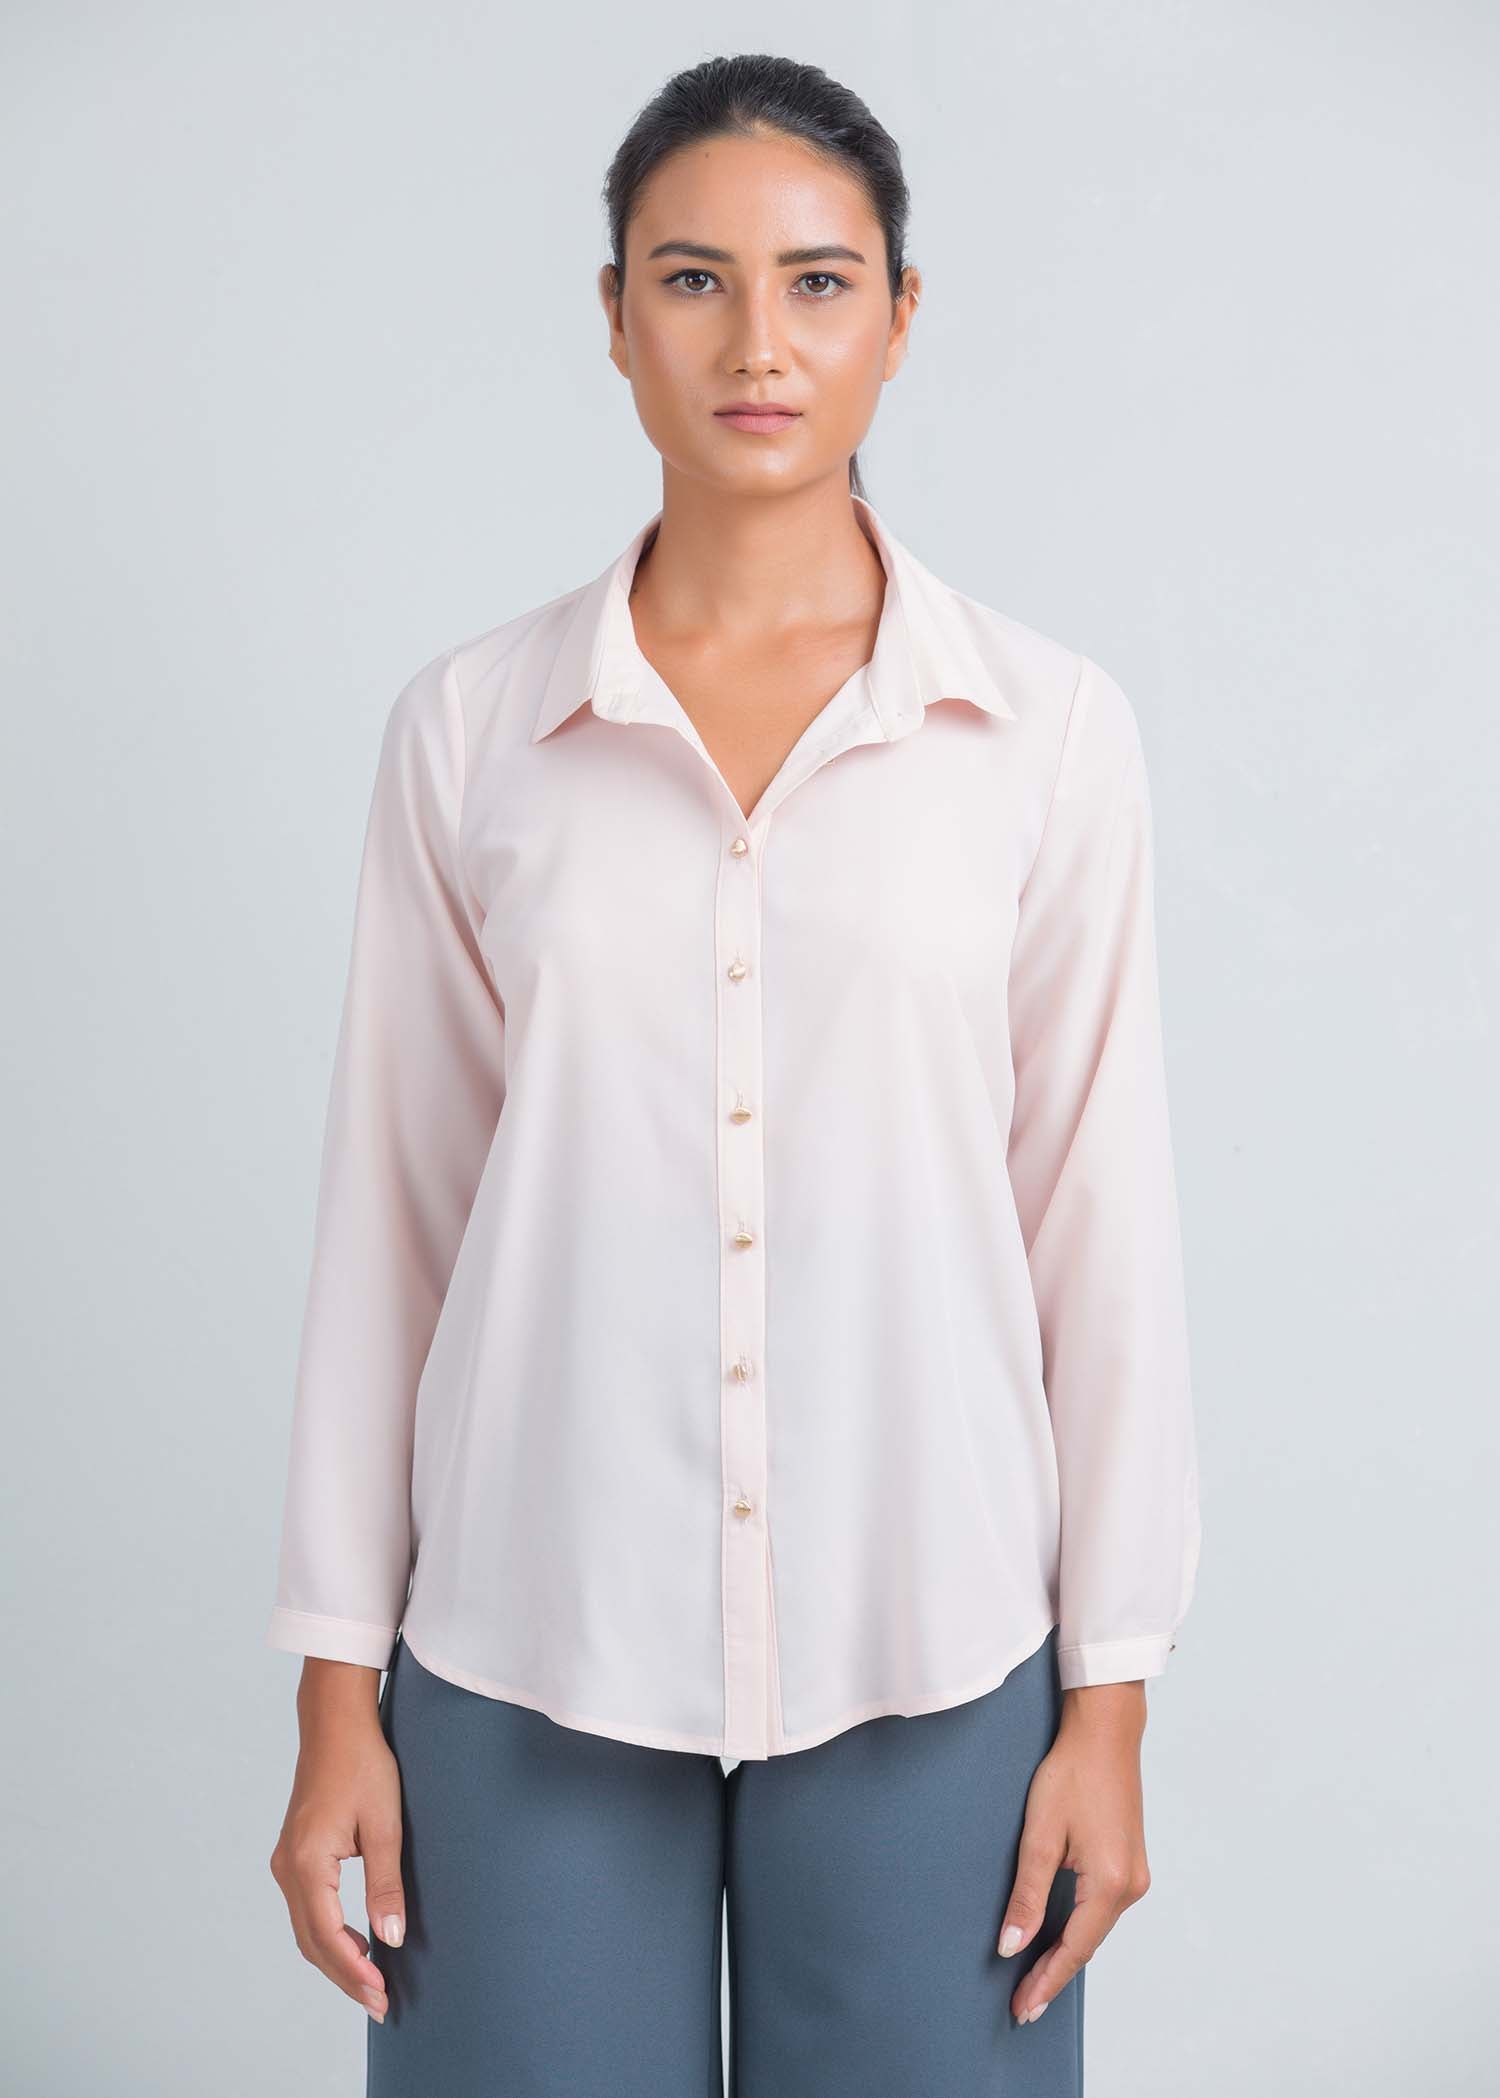 Basic button down shirt with gold buttons